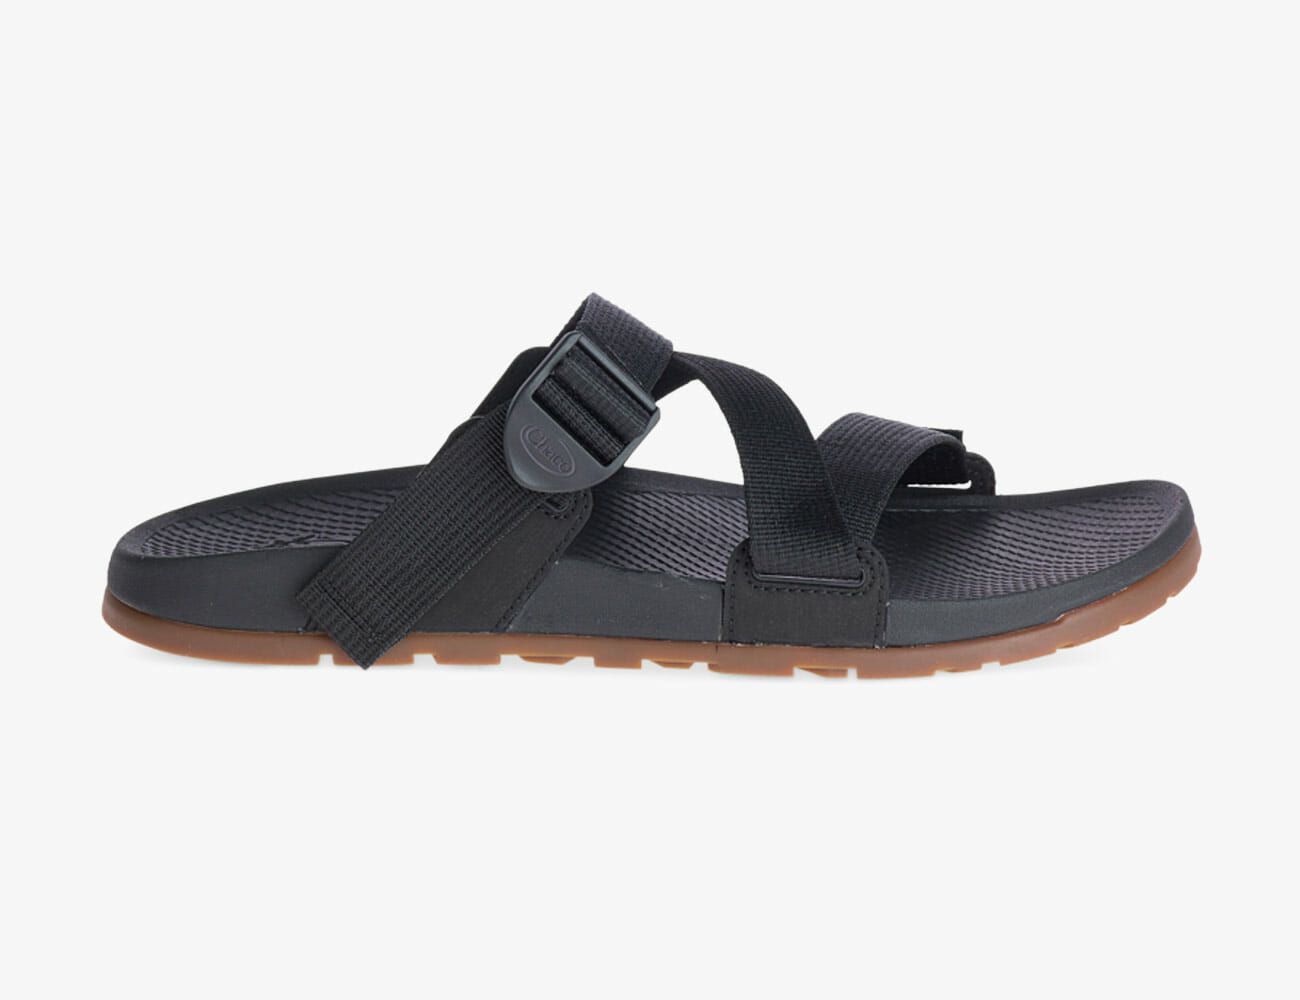 Like Birkenstock Arizona Sandals? Out These Other Options